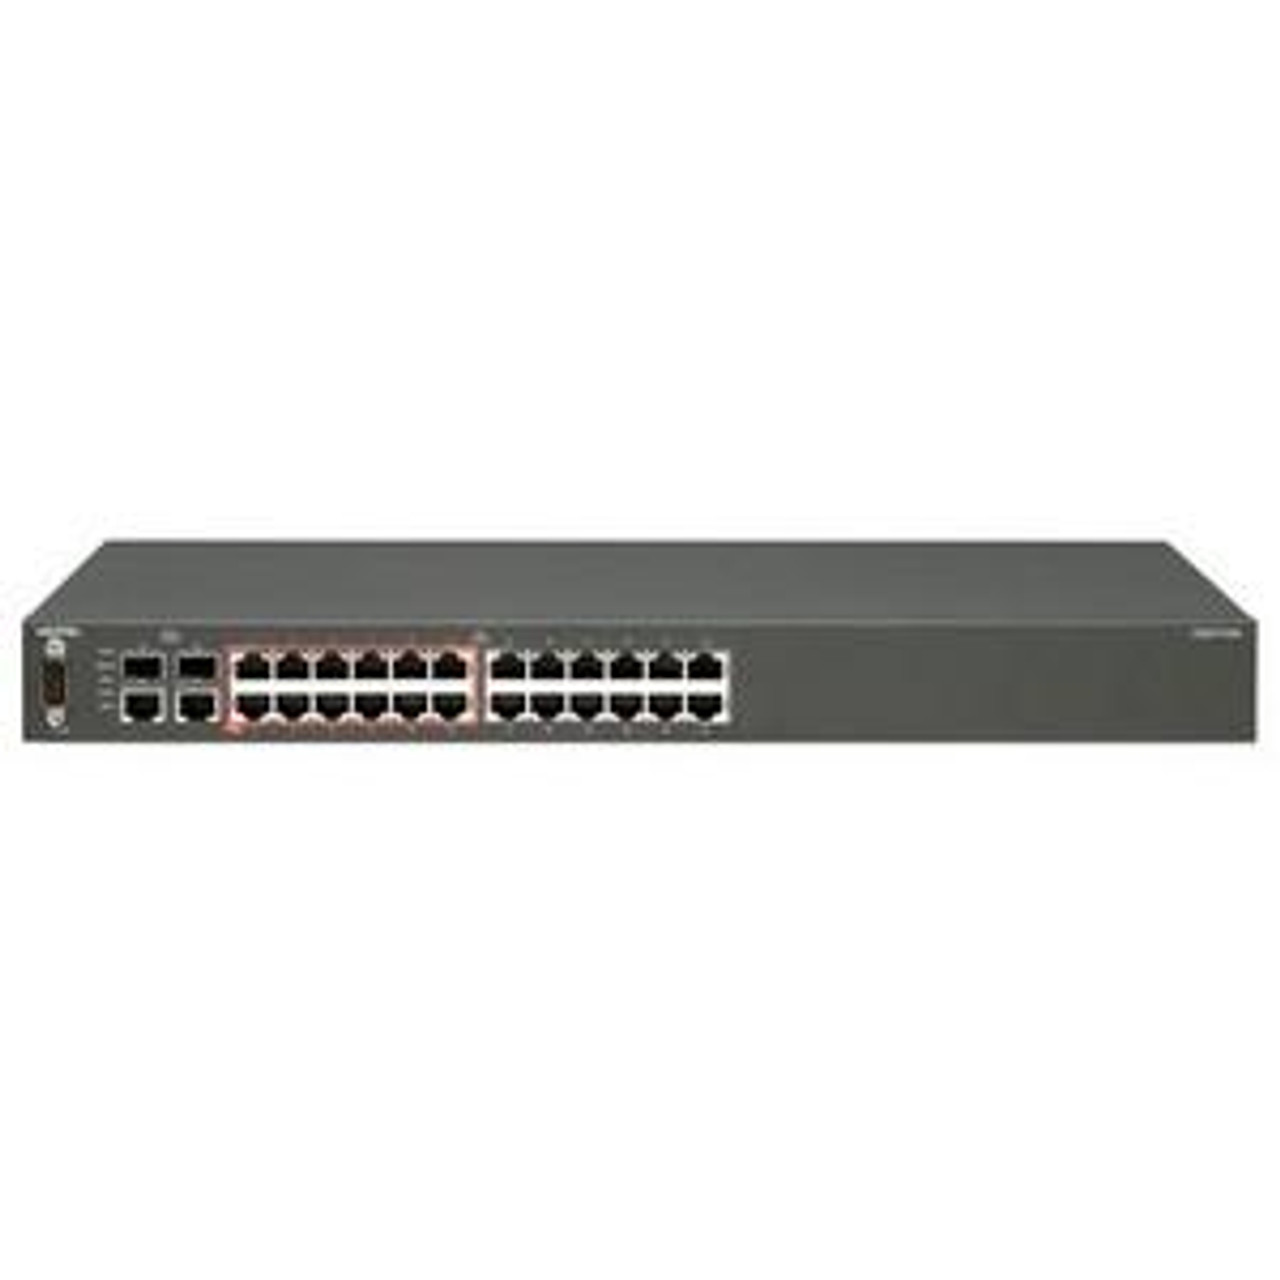 AL2500B11-E6 Nortel Ethernet Routing Switch 2526T with 24-Ports Fast Ethernet 10/100 ports- 2 Combo SFP with Power cord (Refurbished)